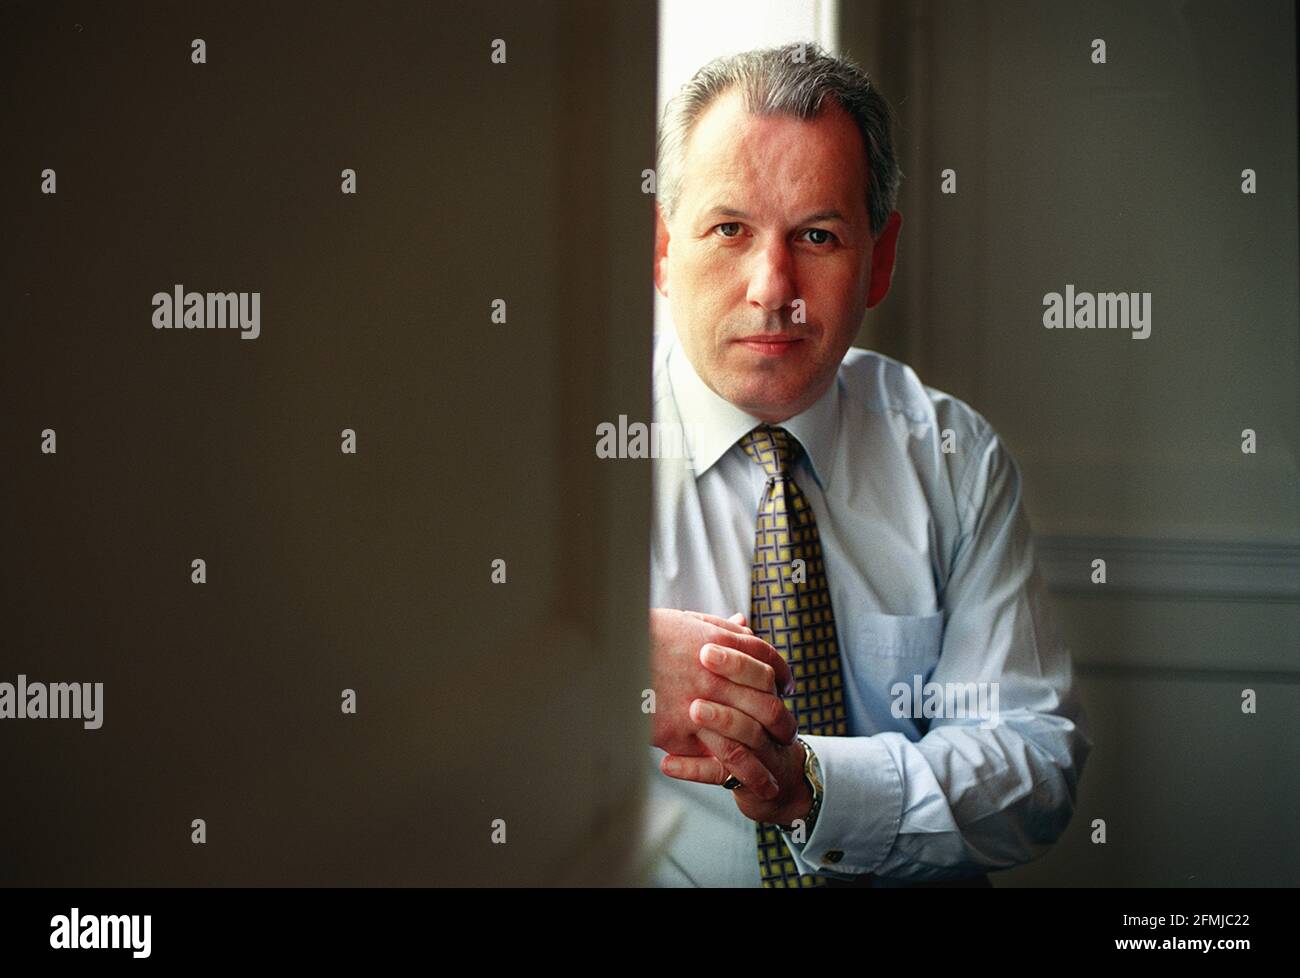 ANDREW FLANAGAN, CHIEF EXECUTIVE OF SMG plc. 22 August 2000 PHOTO ANDY PARADISE Stock Photo